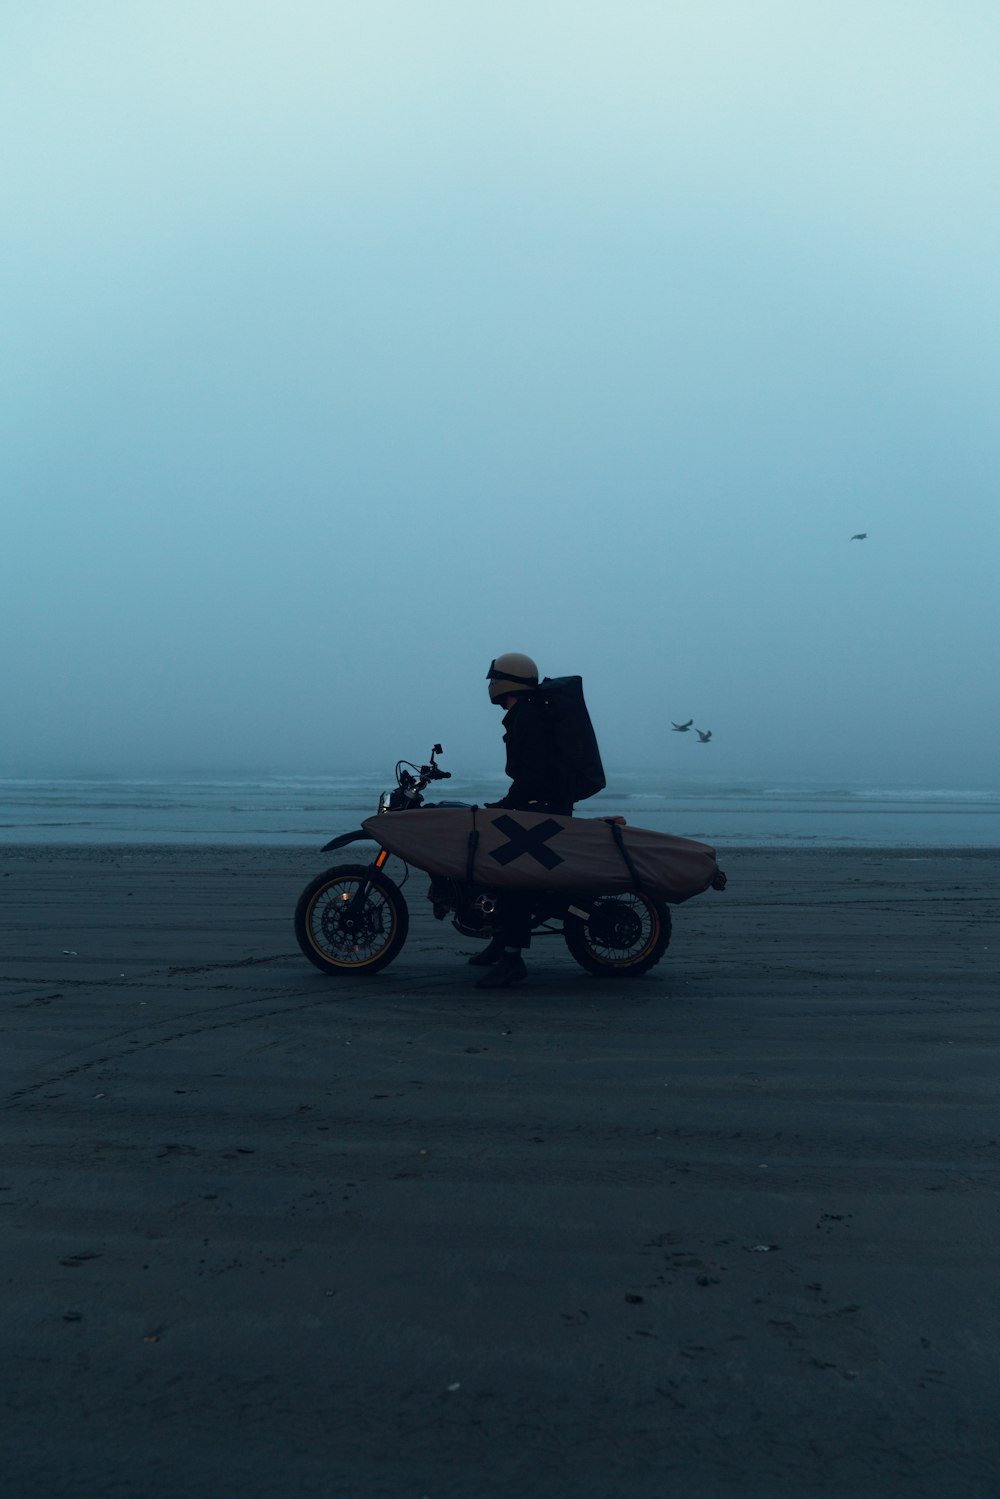 a person on a motorcycle on a beach